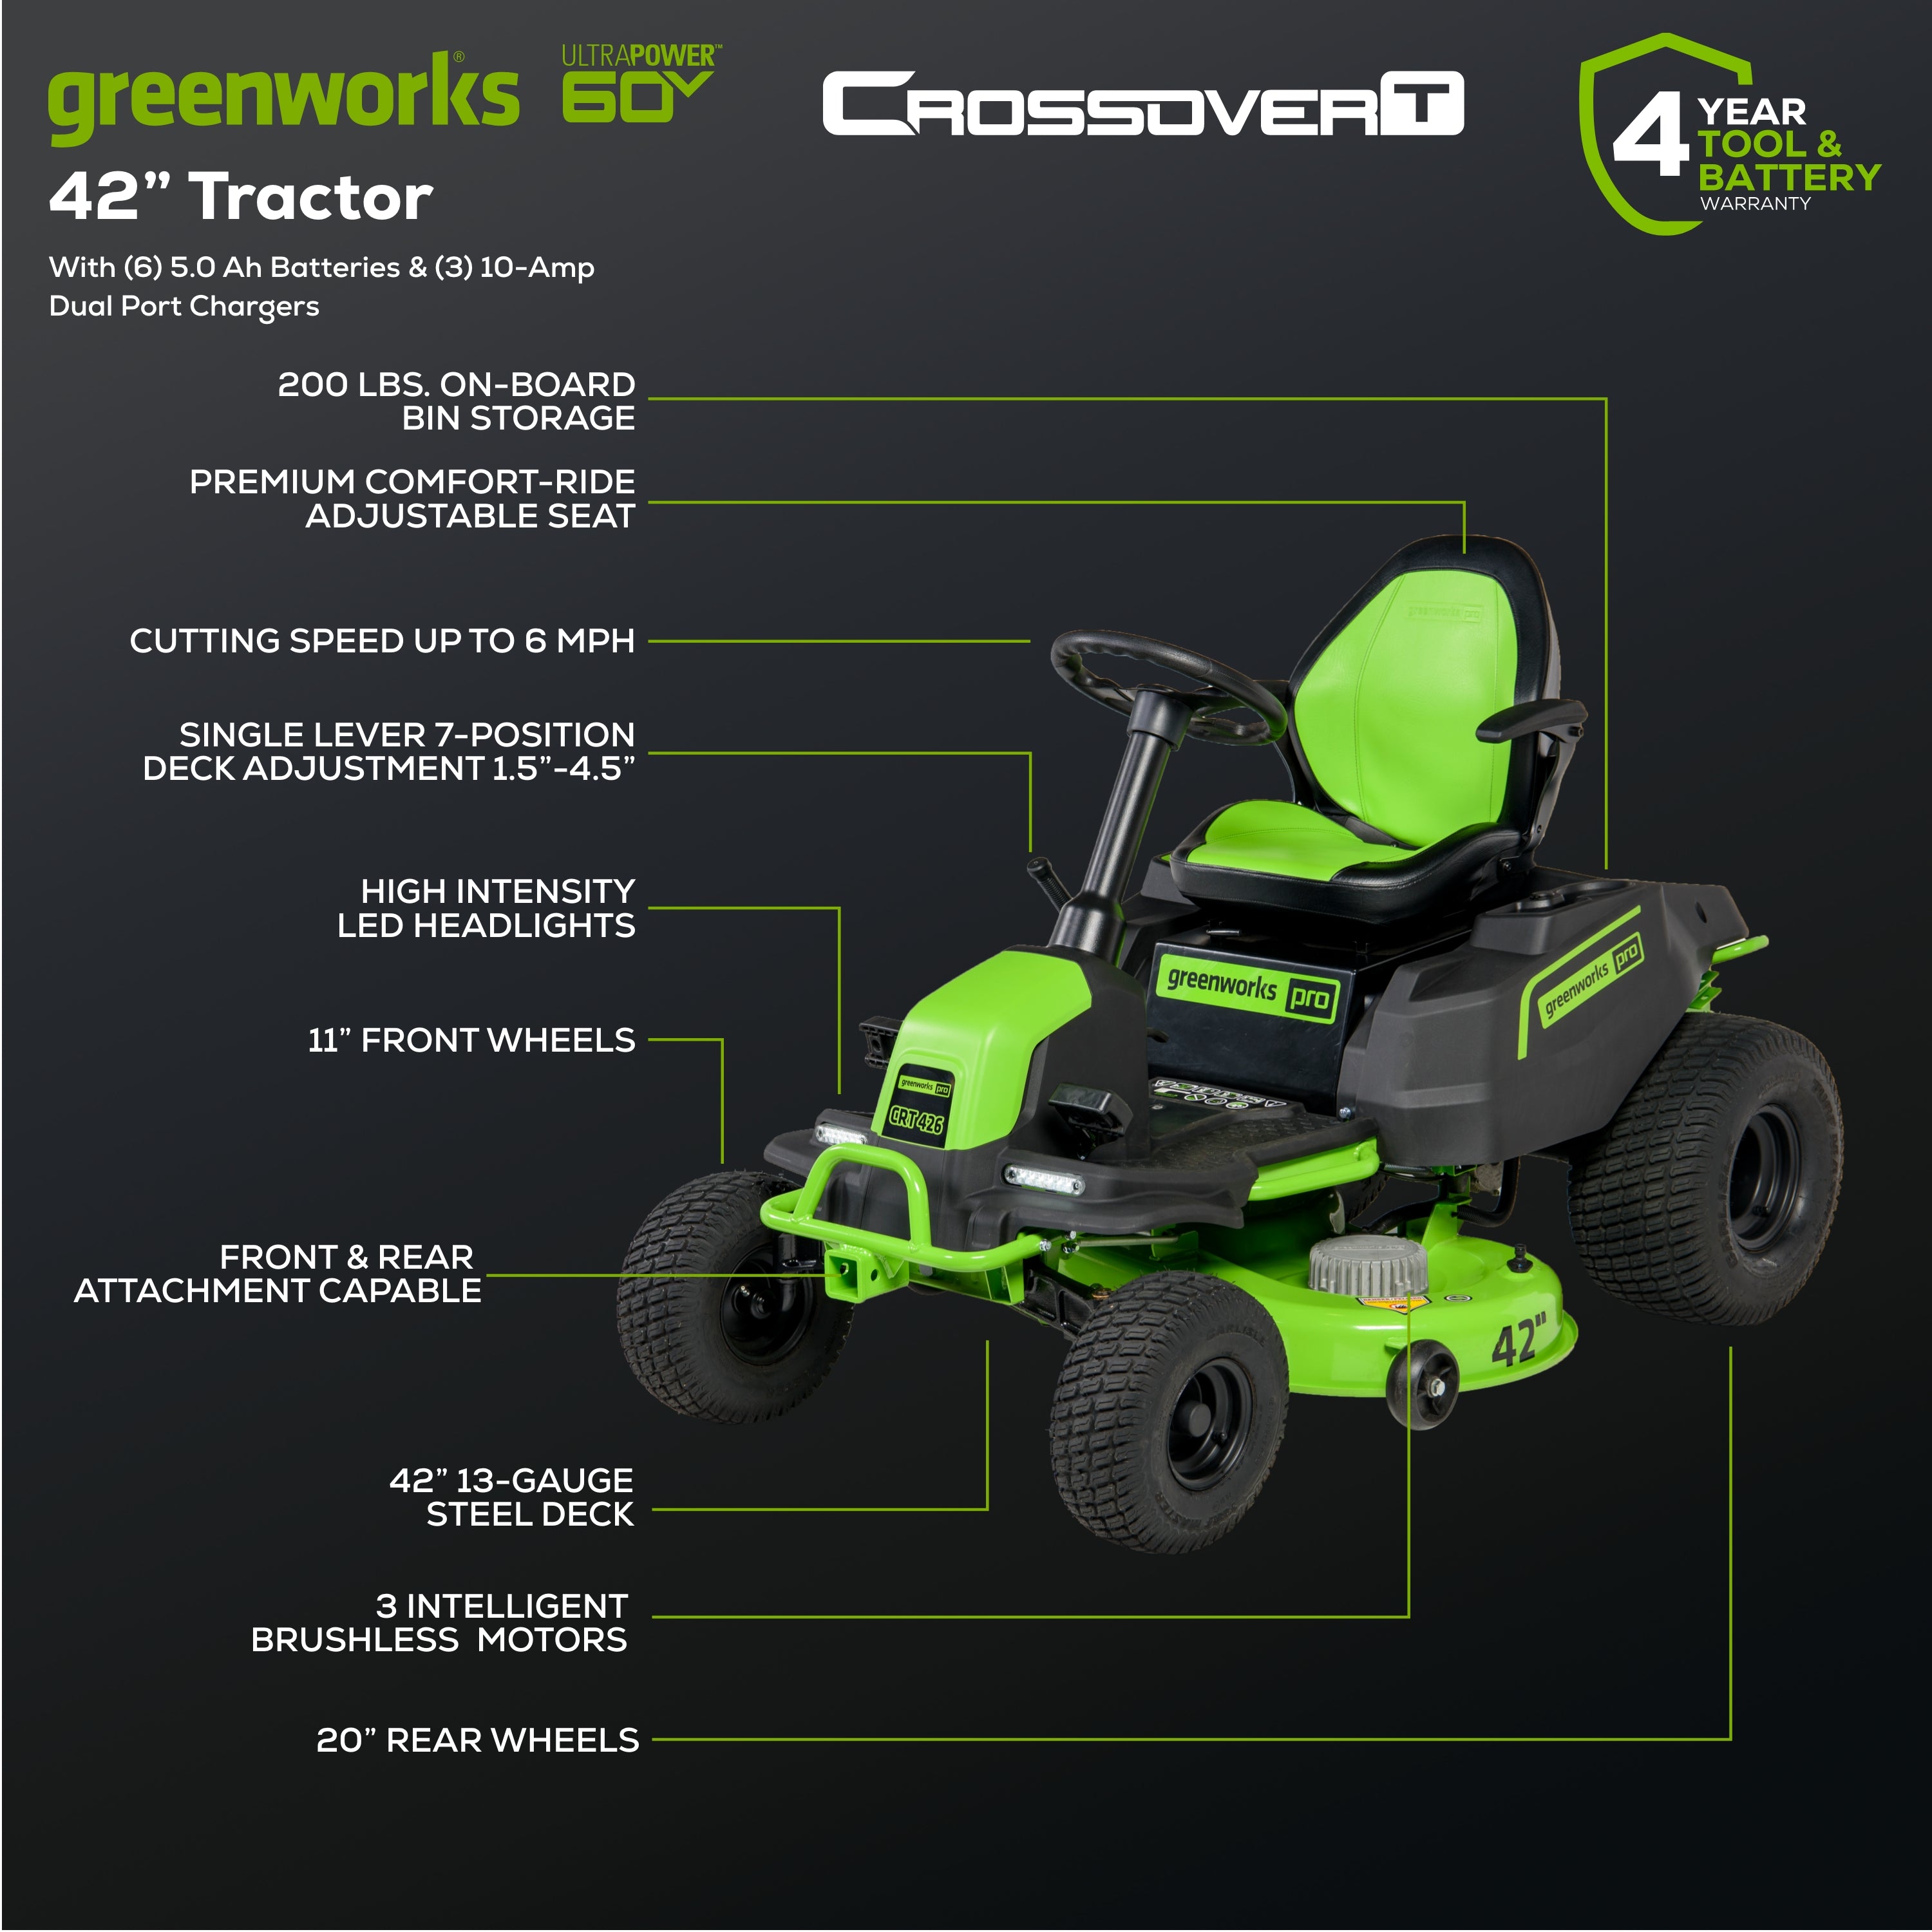 80V 42" Cordless Battery CrossoverT Riding Lawn Mower w/ Six (6) 5.0Ah Batteries and Three (3) Dual Port Turbo Chargers